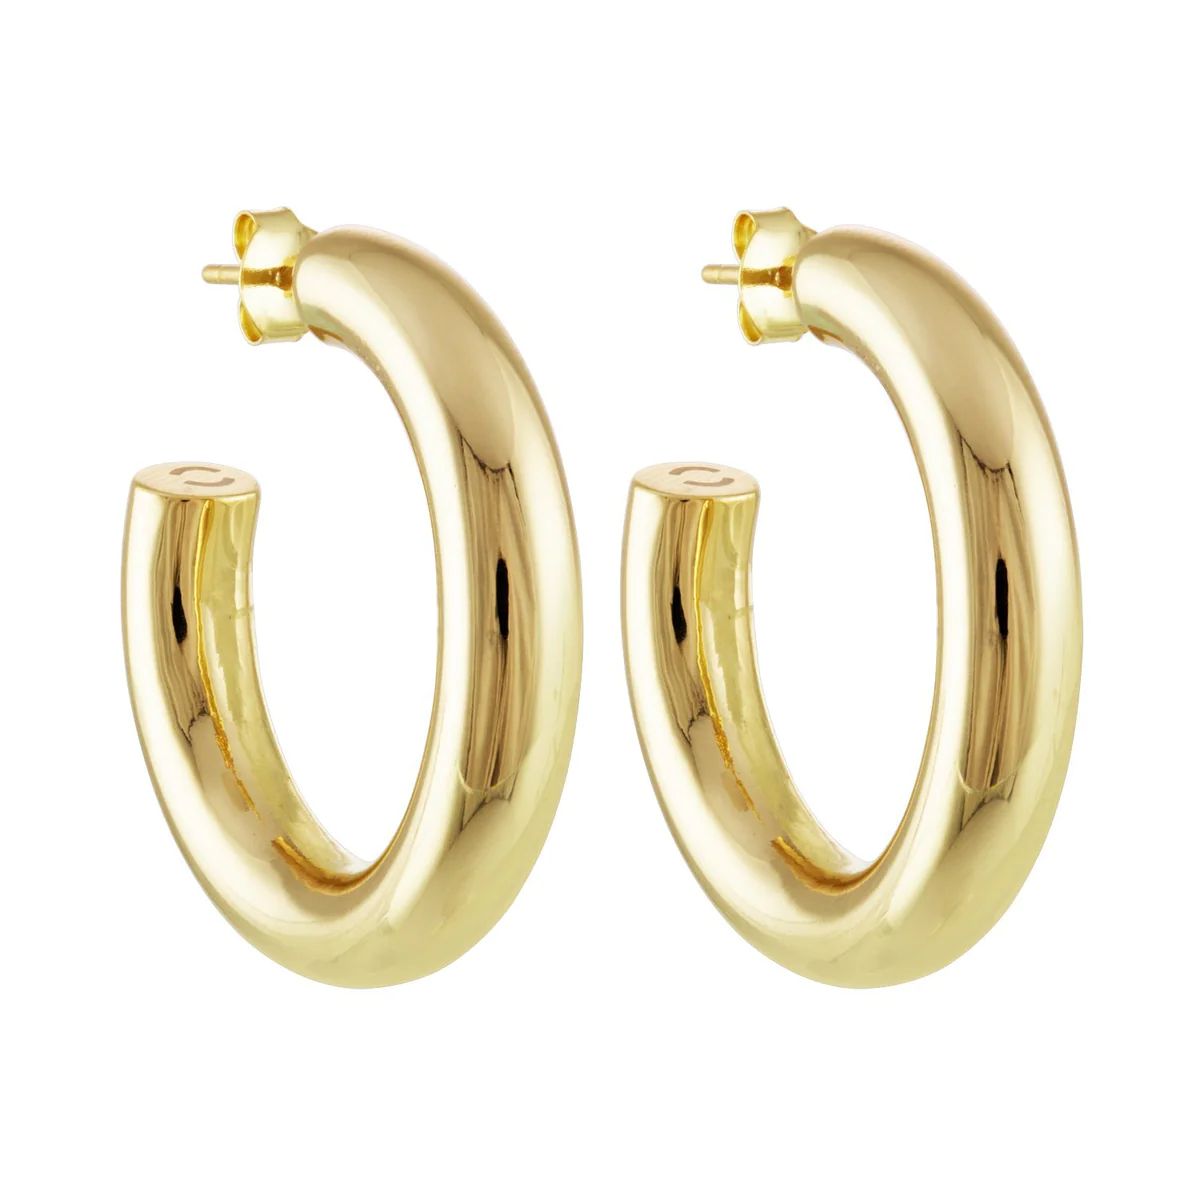 1.5" Perfect Hoops in Gold | Machete